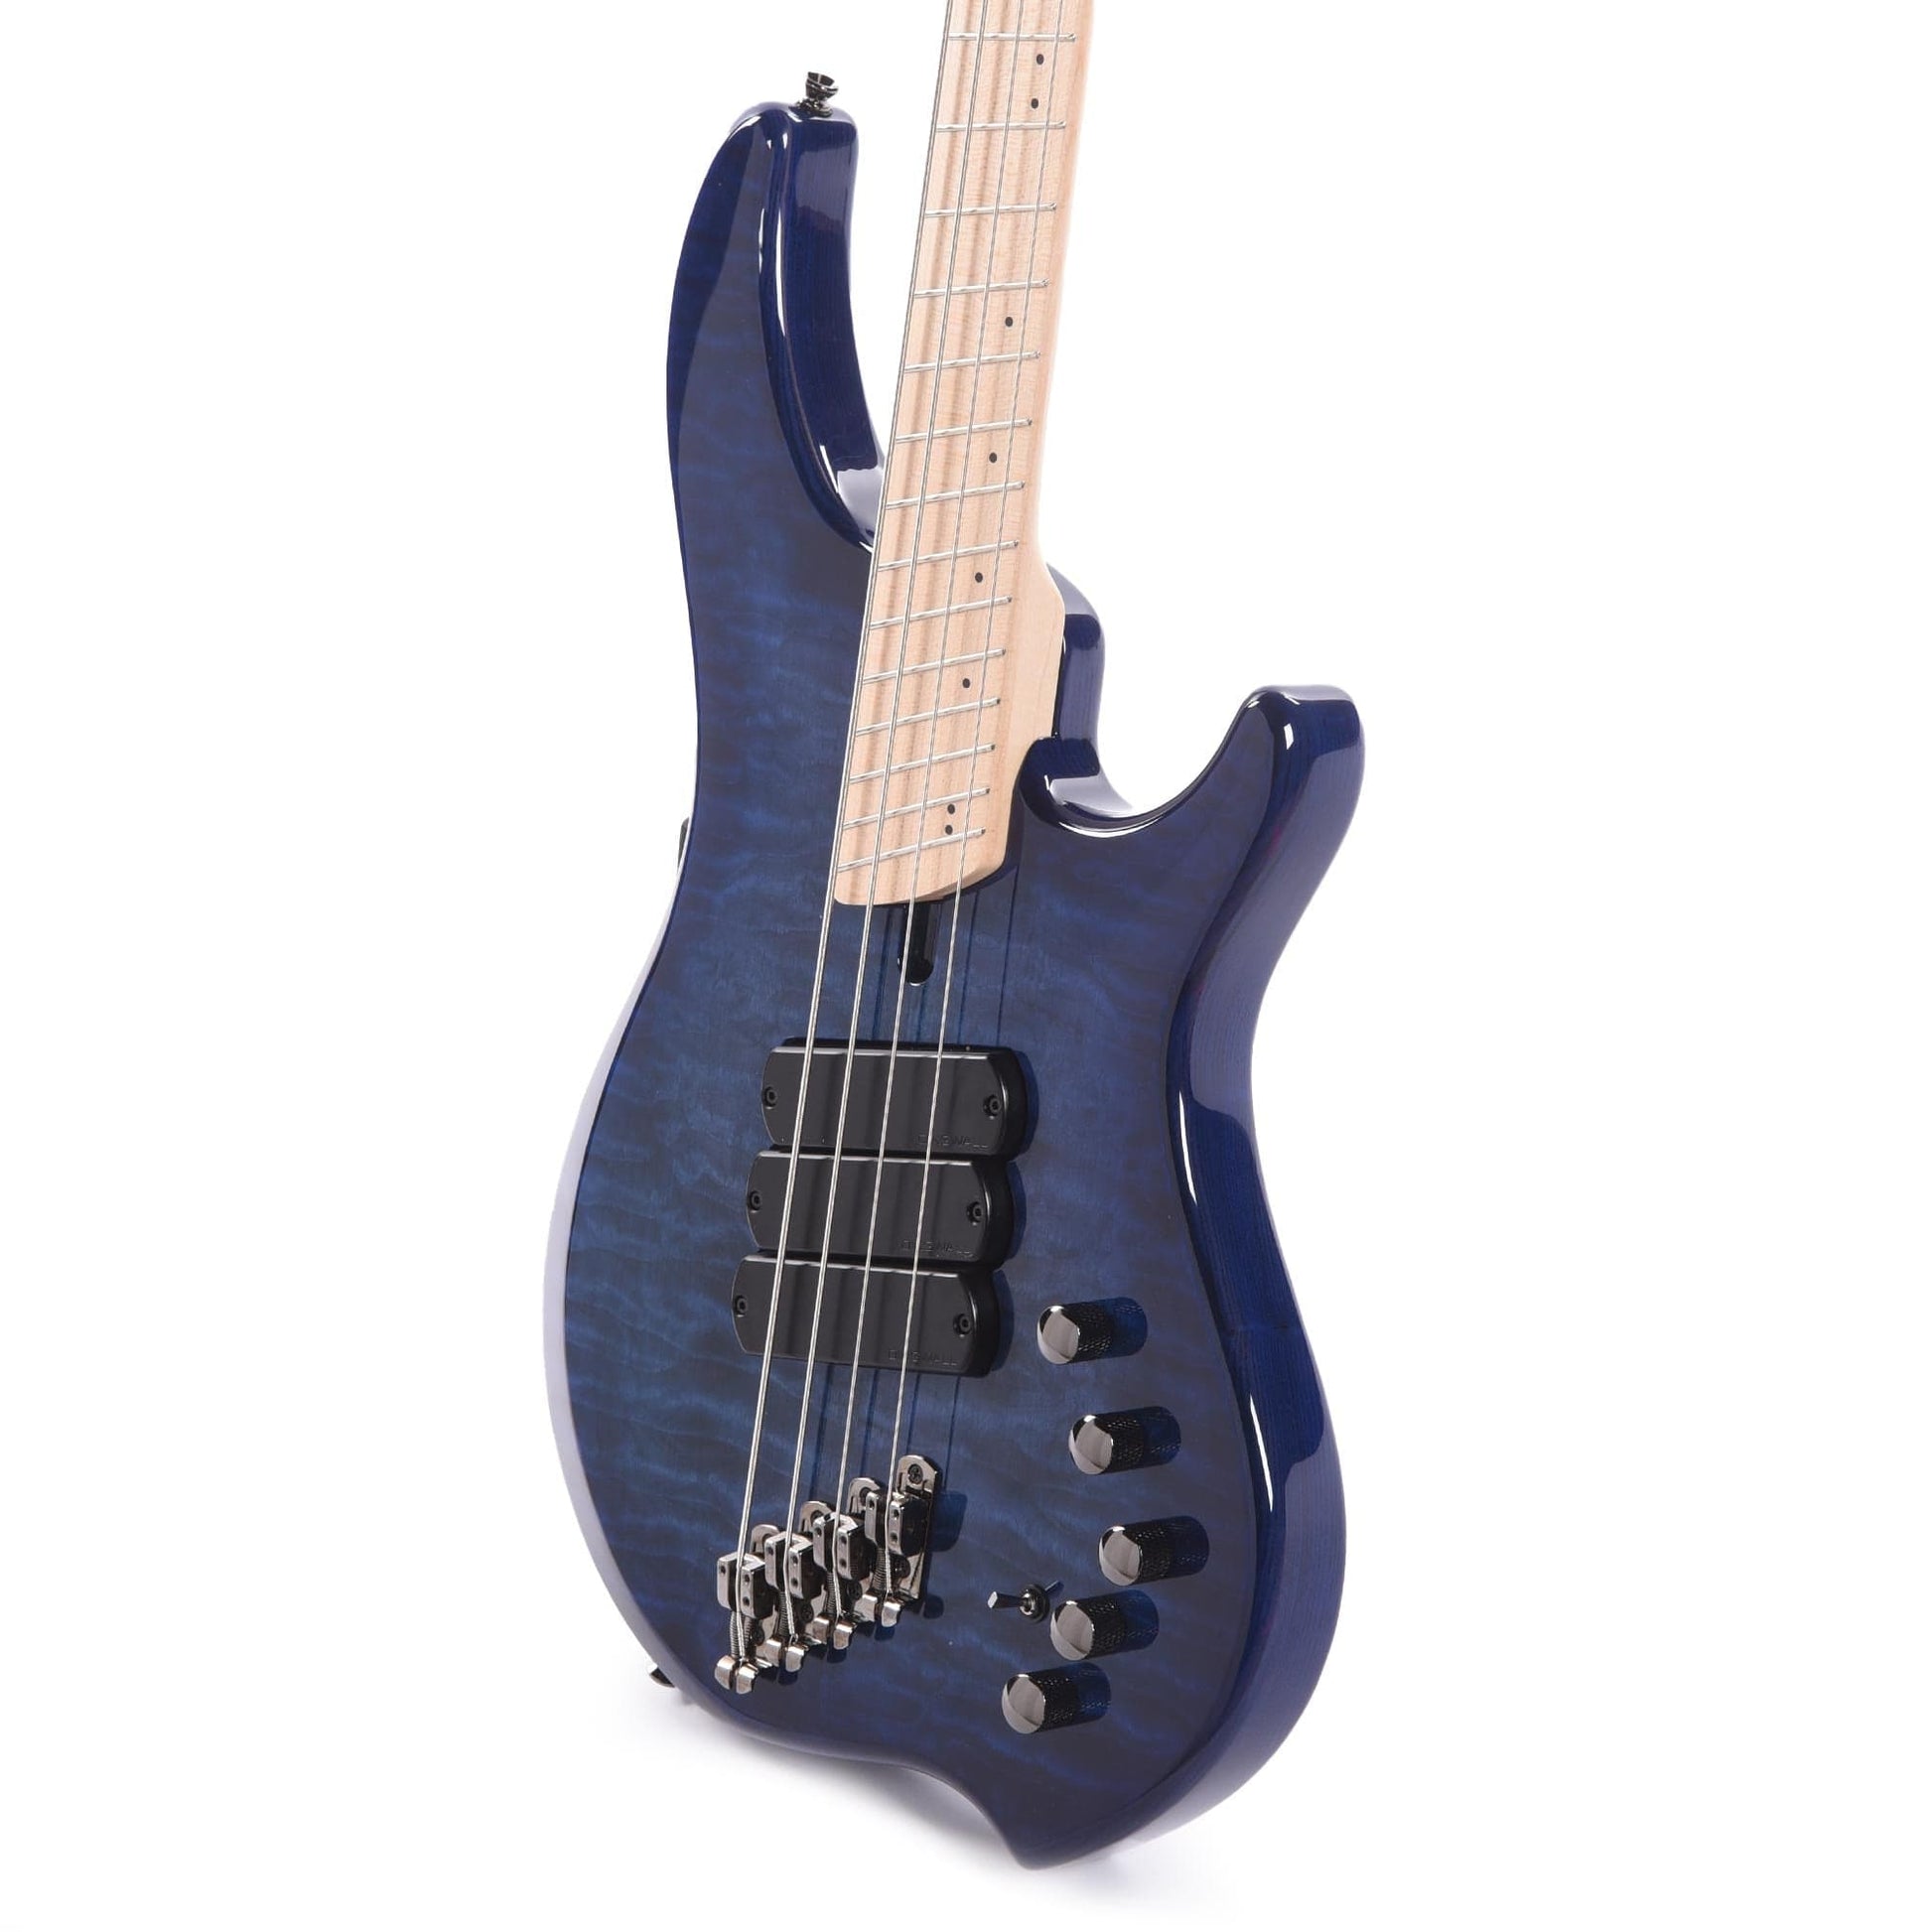 Dingwall Combustion Swamp Ash/Quilted Maple Indigo Burst Bass Guitars / 4-String